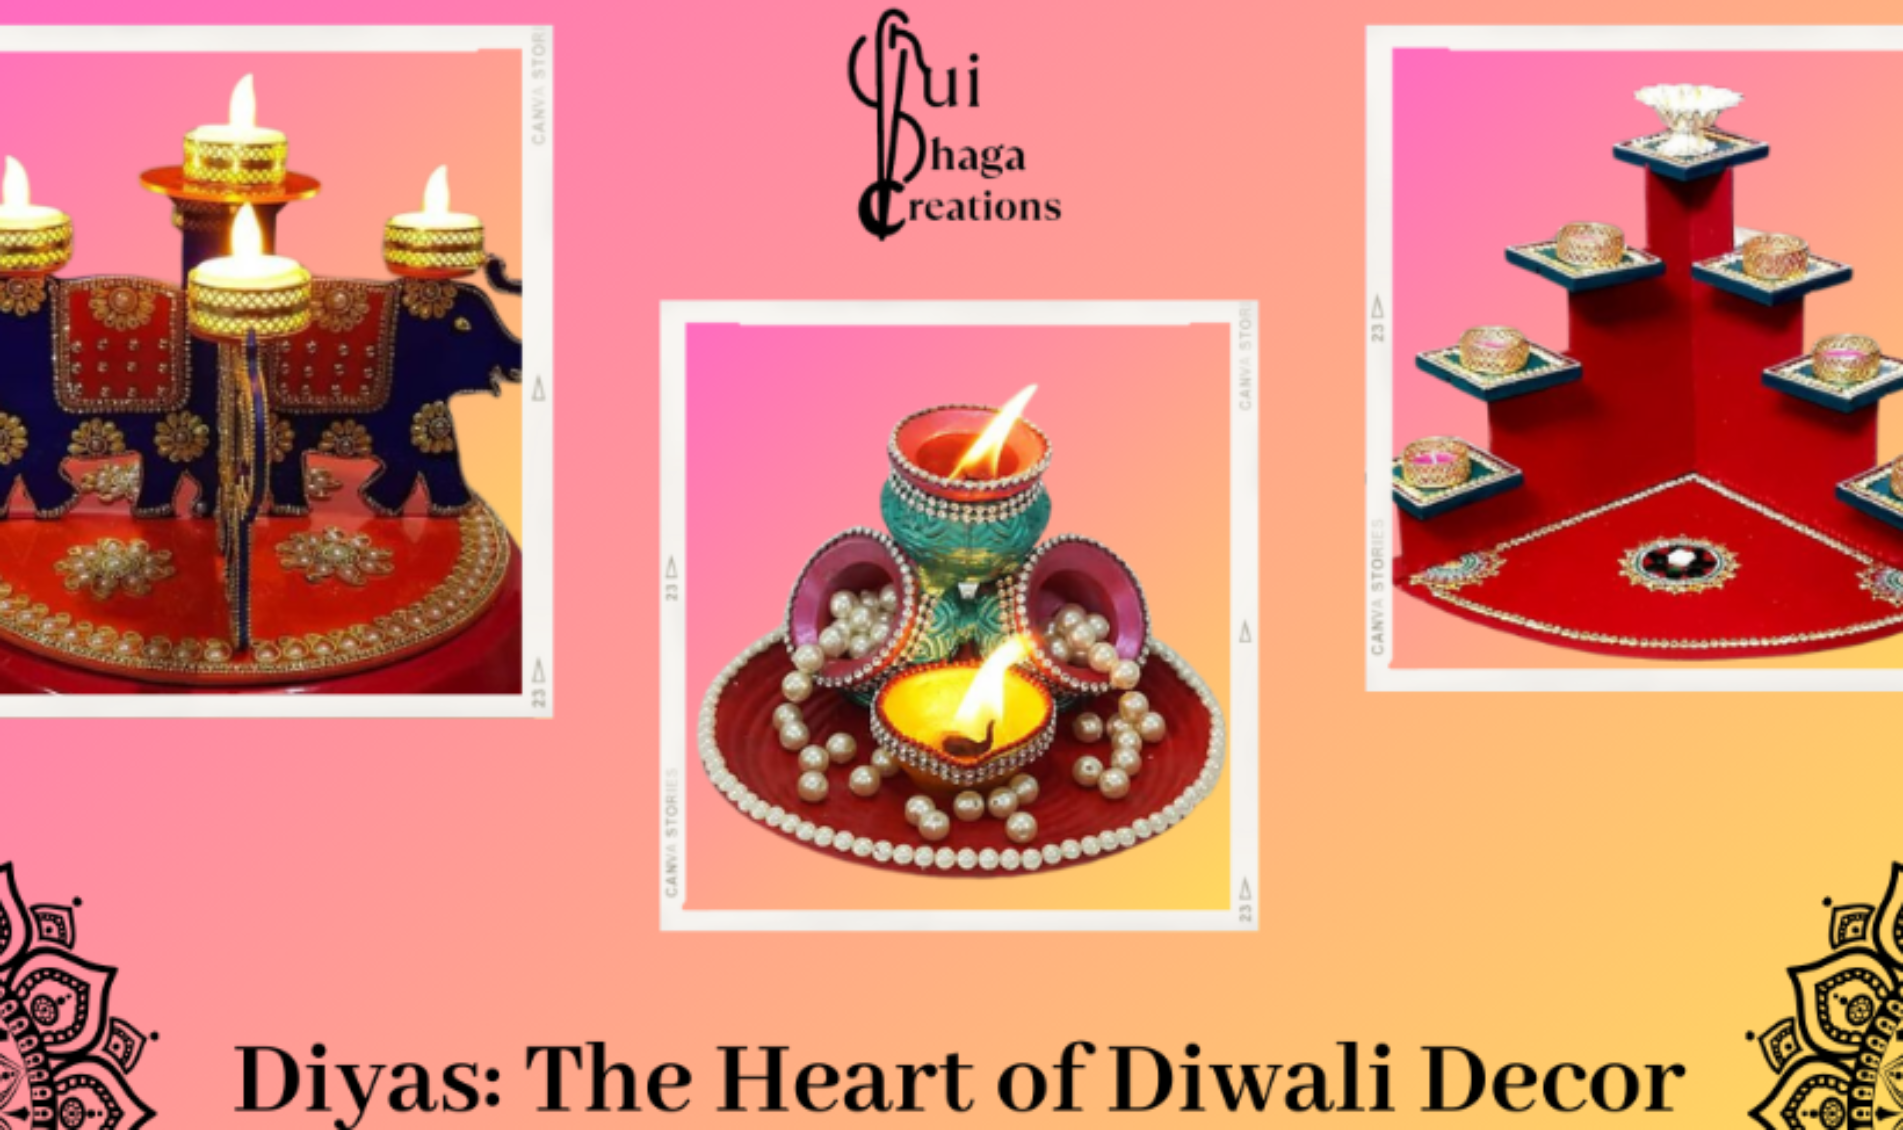 Transform Your Home into a Diwali Haven: Our Top Traditional Decor Picks